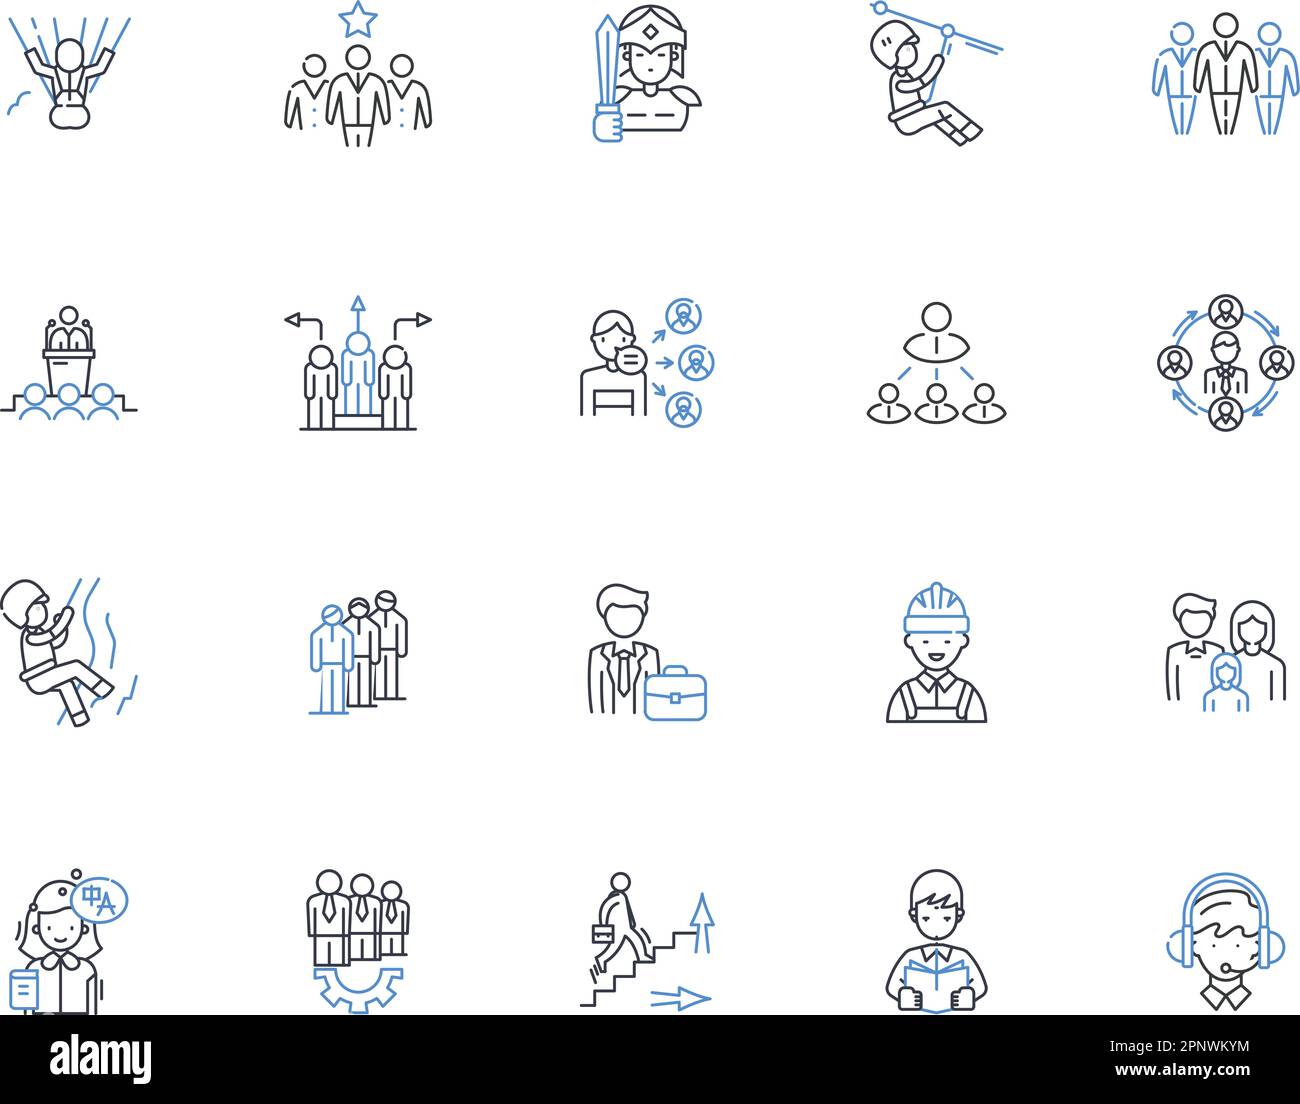 Open-minded individuals line icons collection. Accepting, Adaptive, Broadminded, Tolerant, Nonjudgmental, Inquisitive, Curious vector and linear Stock Vector